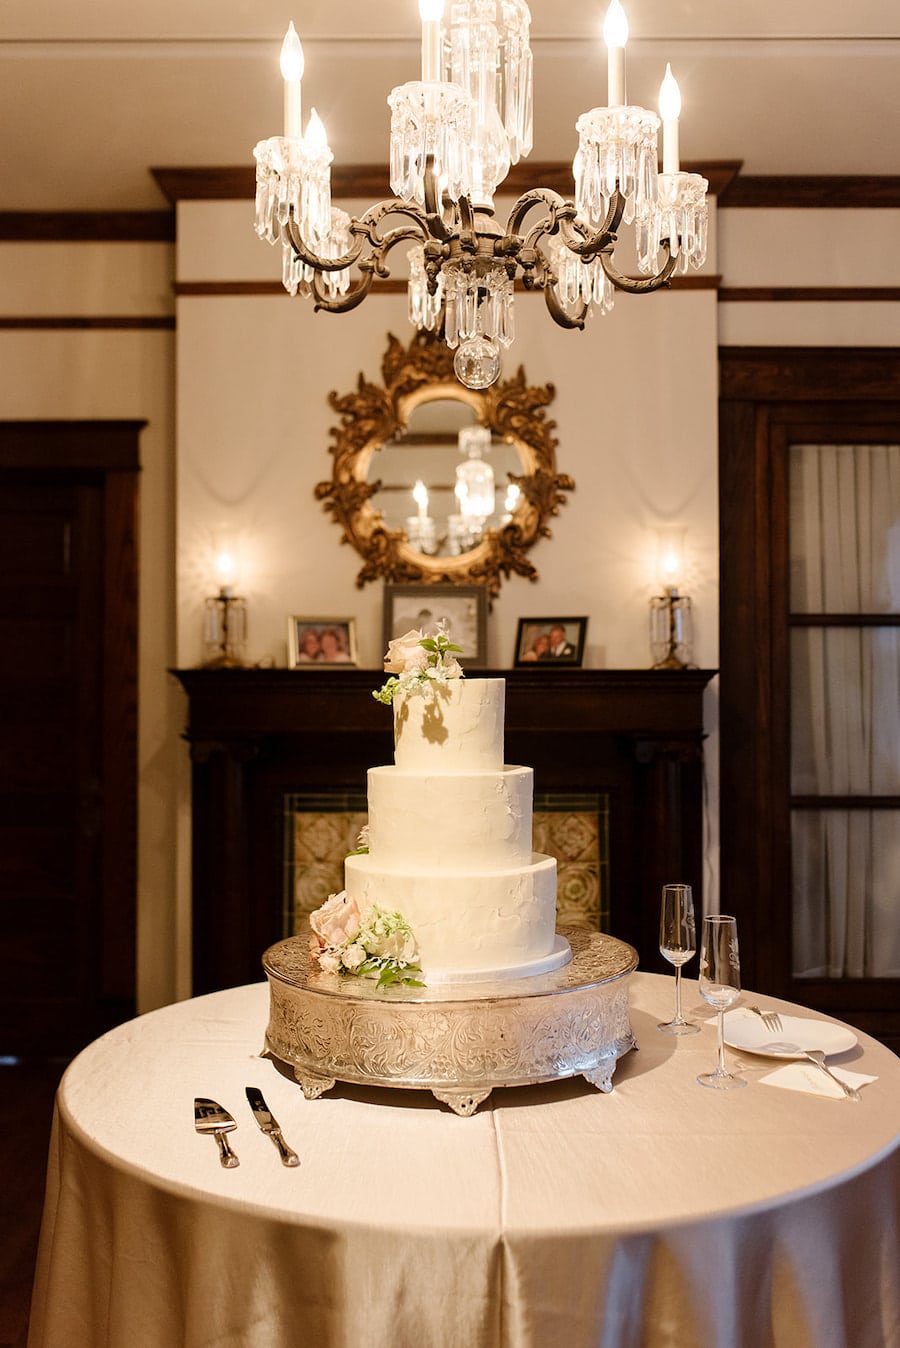 Simple but elegant wedding cake with buttercream icing and fresh flowers and greenery at garden wedding venue CJ’s Off the Square near Nashville, TN. 